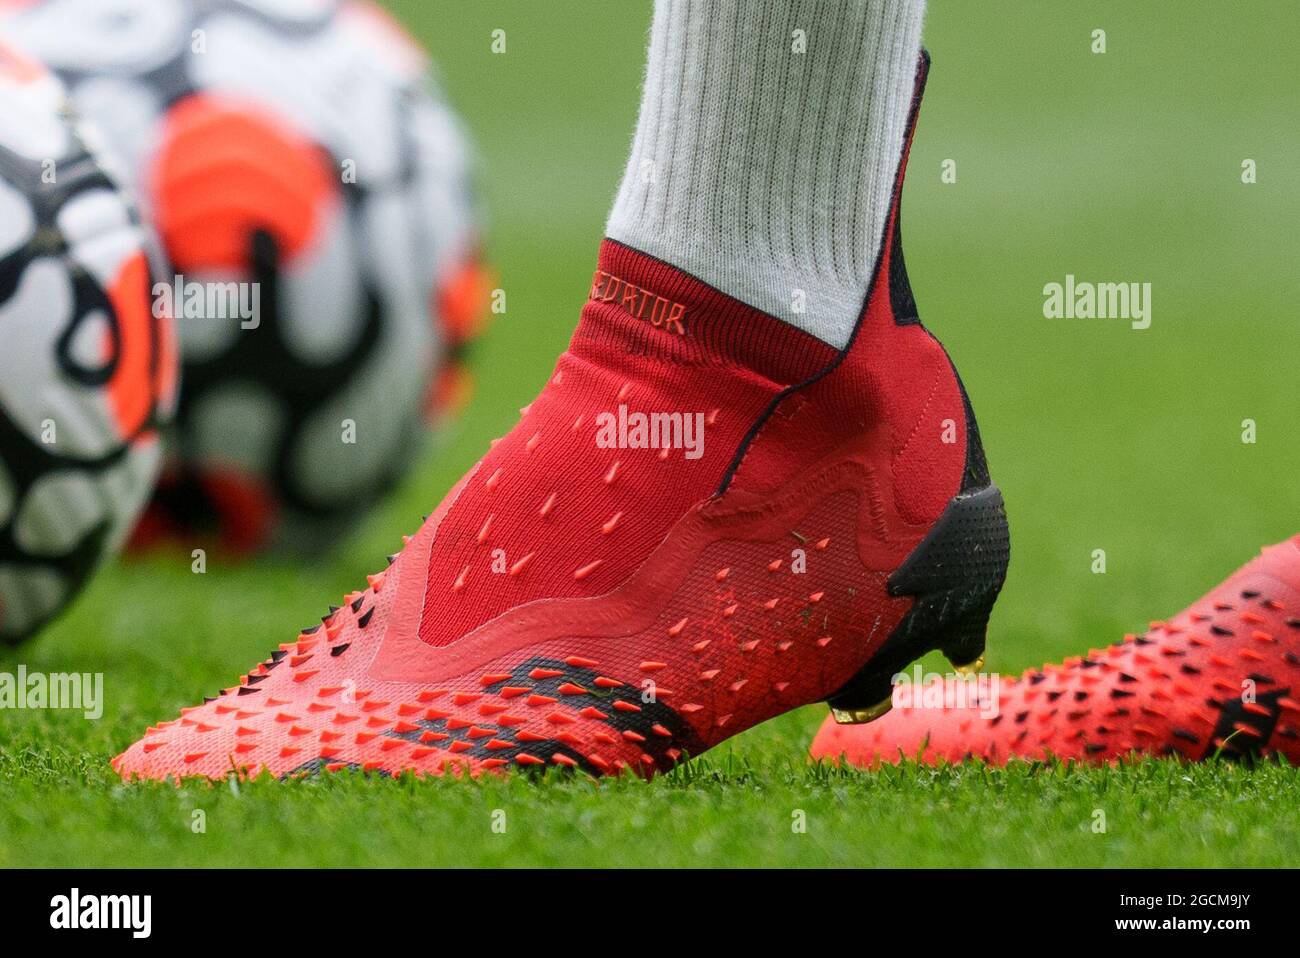 White Hart Lane, UK. 08th Aug, 2021. The Adidas predator football boot of Dele  Alli of Spurs pre match during the 2021/22 Pre Season Friendly 'Mind series  tournament' match between Tottenham Hotspur